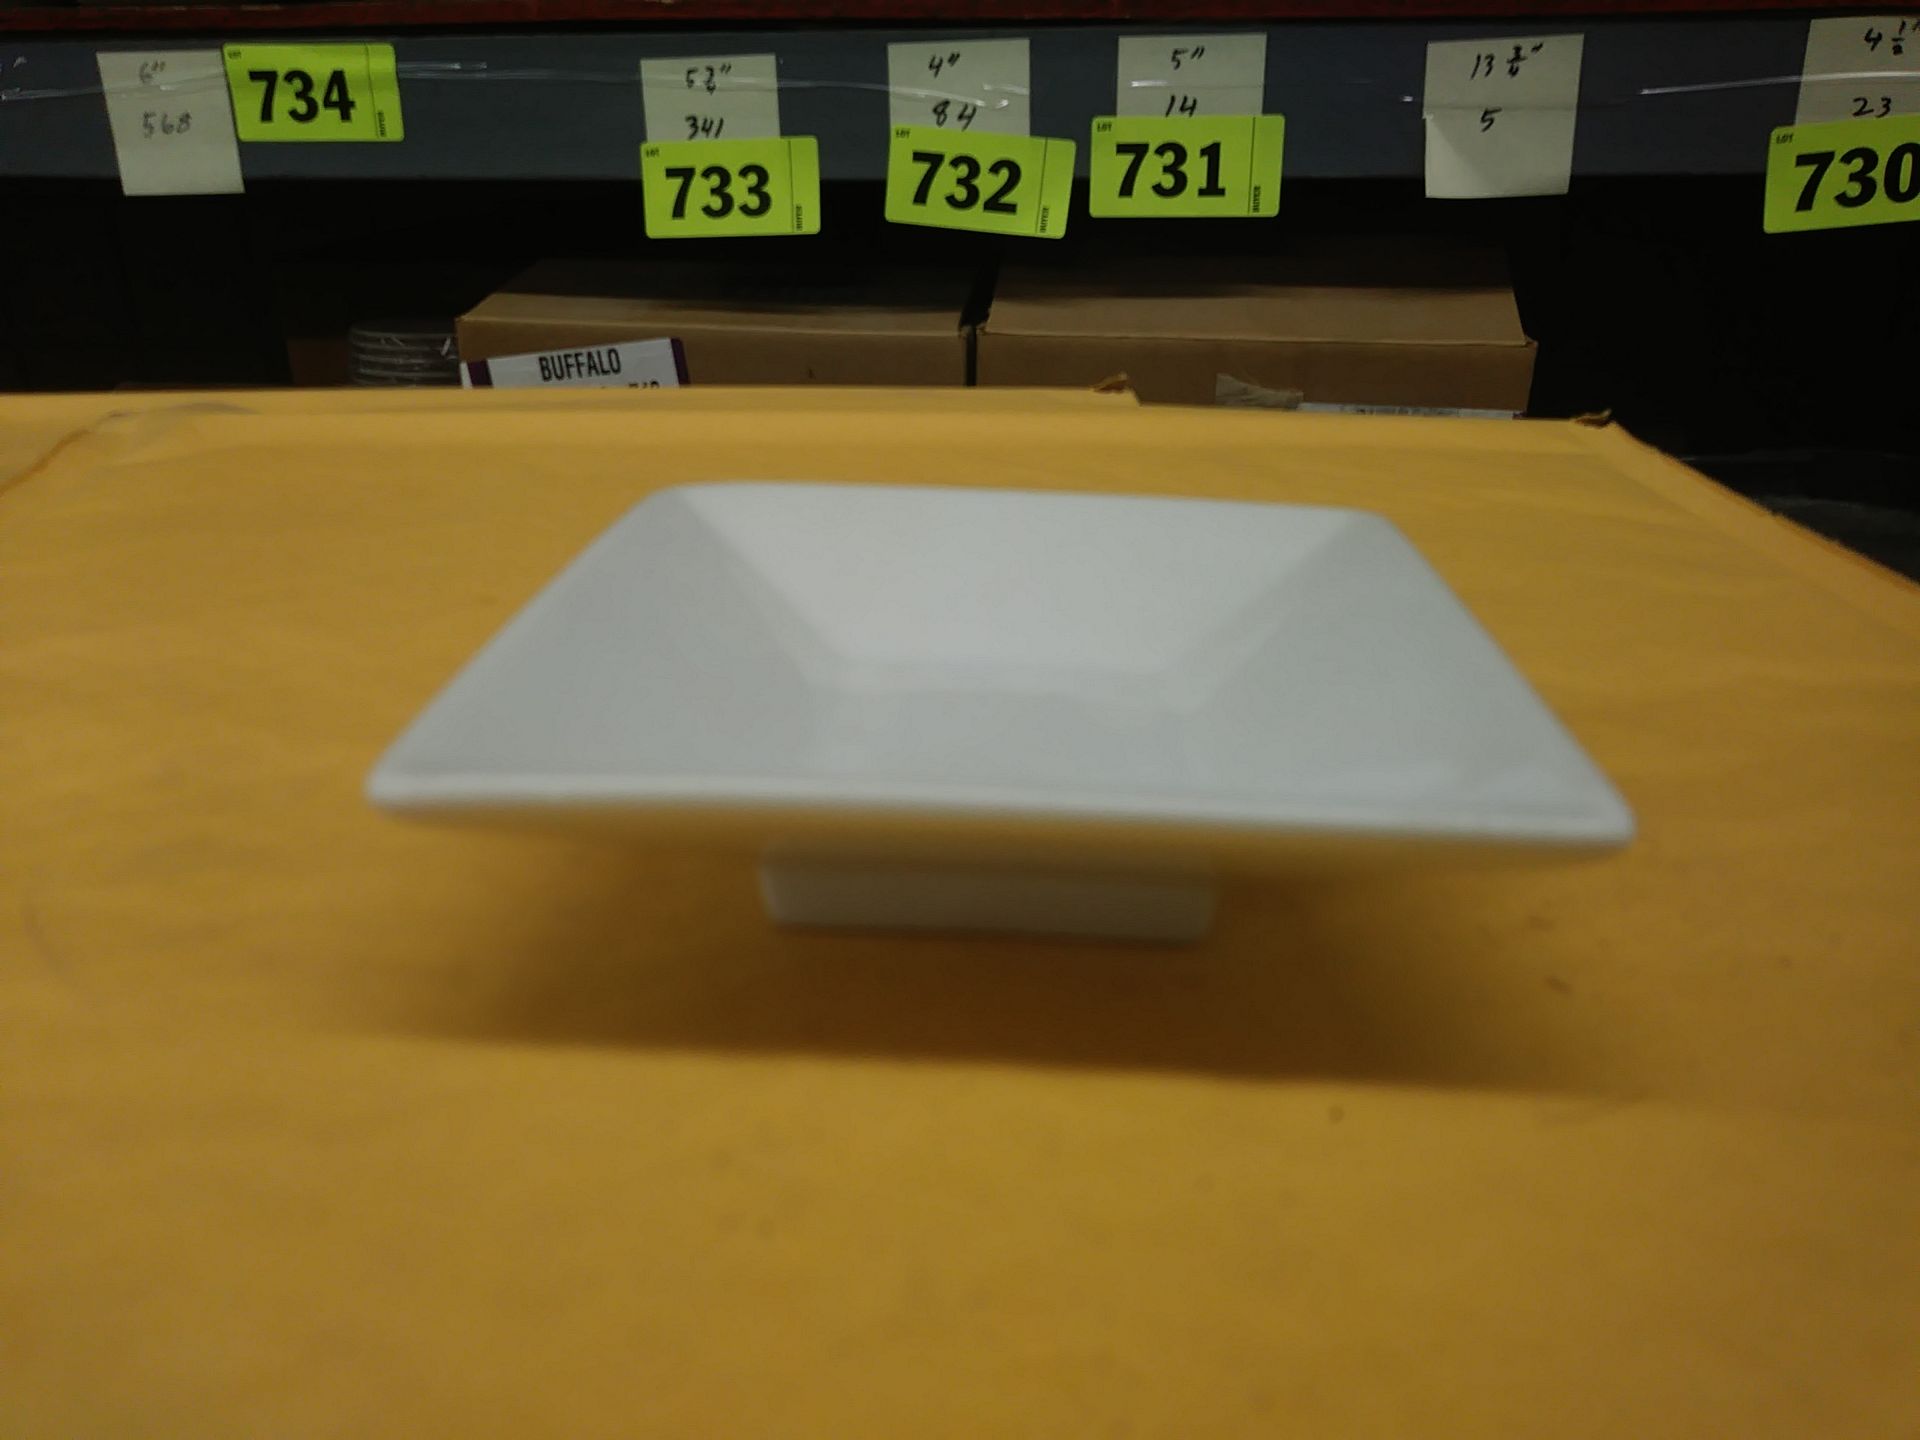 4.5" BUFFALO BRIGHT WHITE DISH (F801A-14) (includes QTY 23 in this lot) - Image 2 of 5